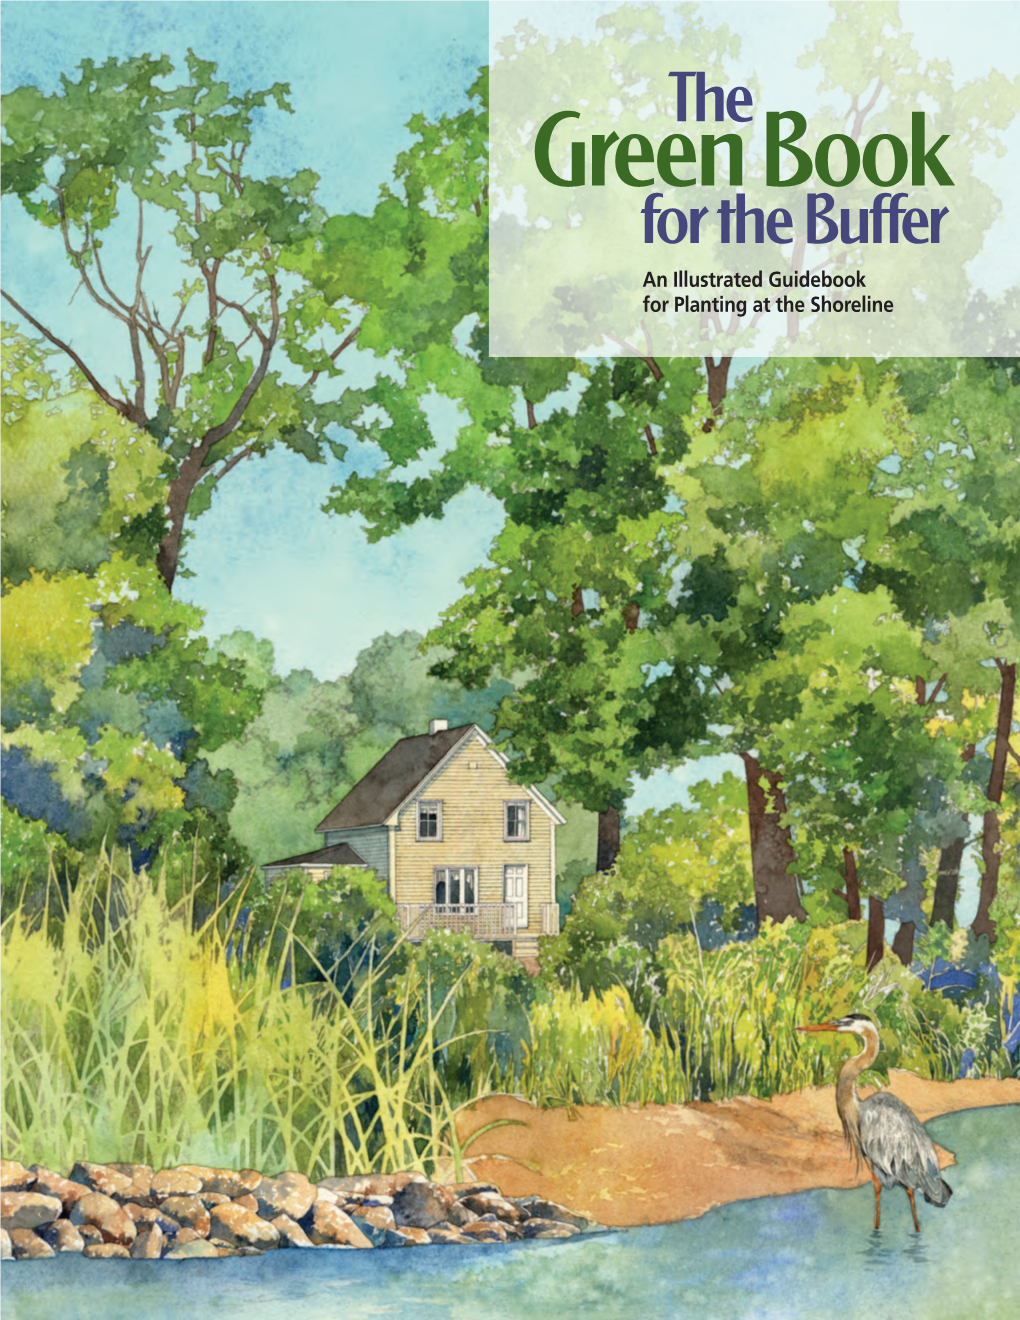 The Green Book for the Buffer Is a Publication of the Maryland Coastal Zone Management Program, Department of Natural Resources Pursuant to NOAA Award No